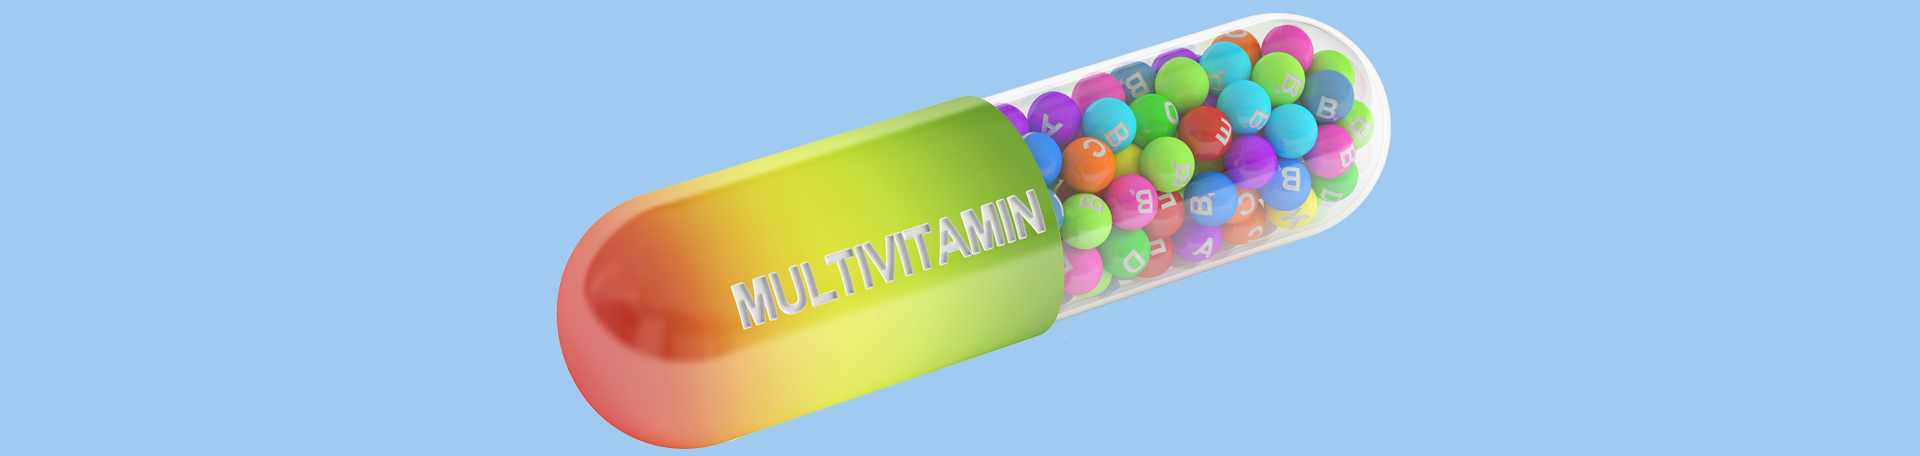 Augusta multivitamin picture to demonstrate benefits for memory and cognition